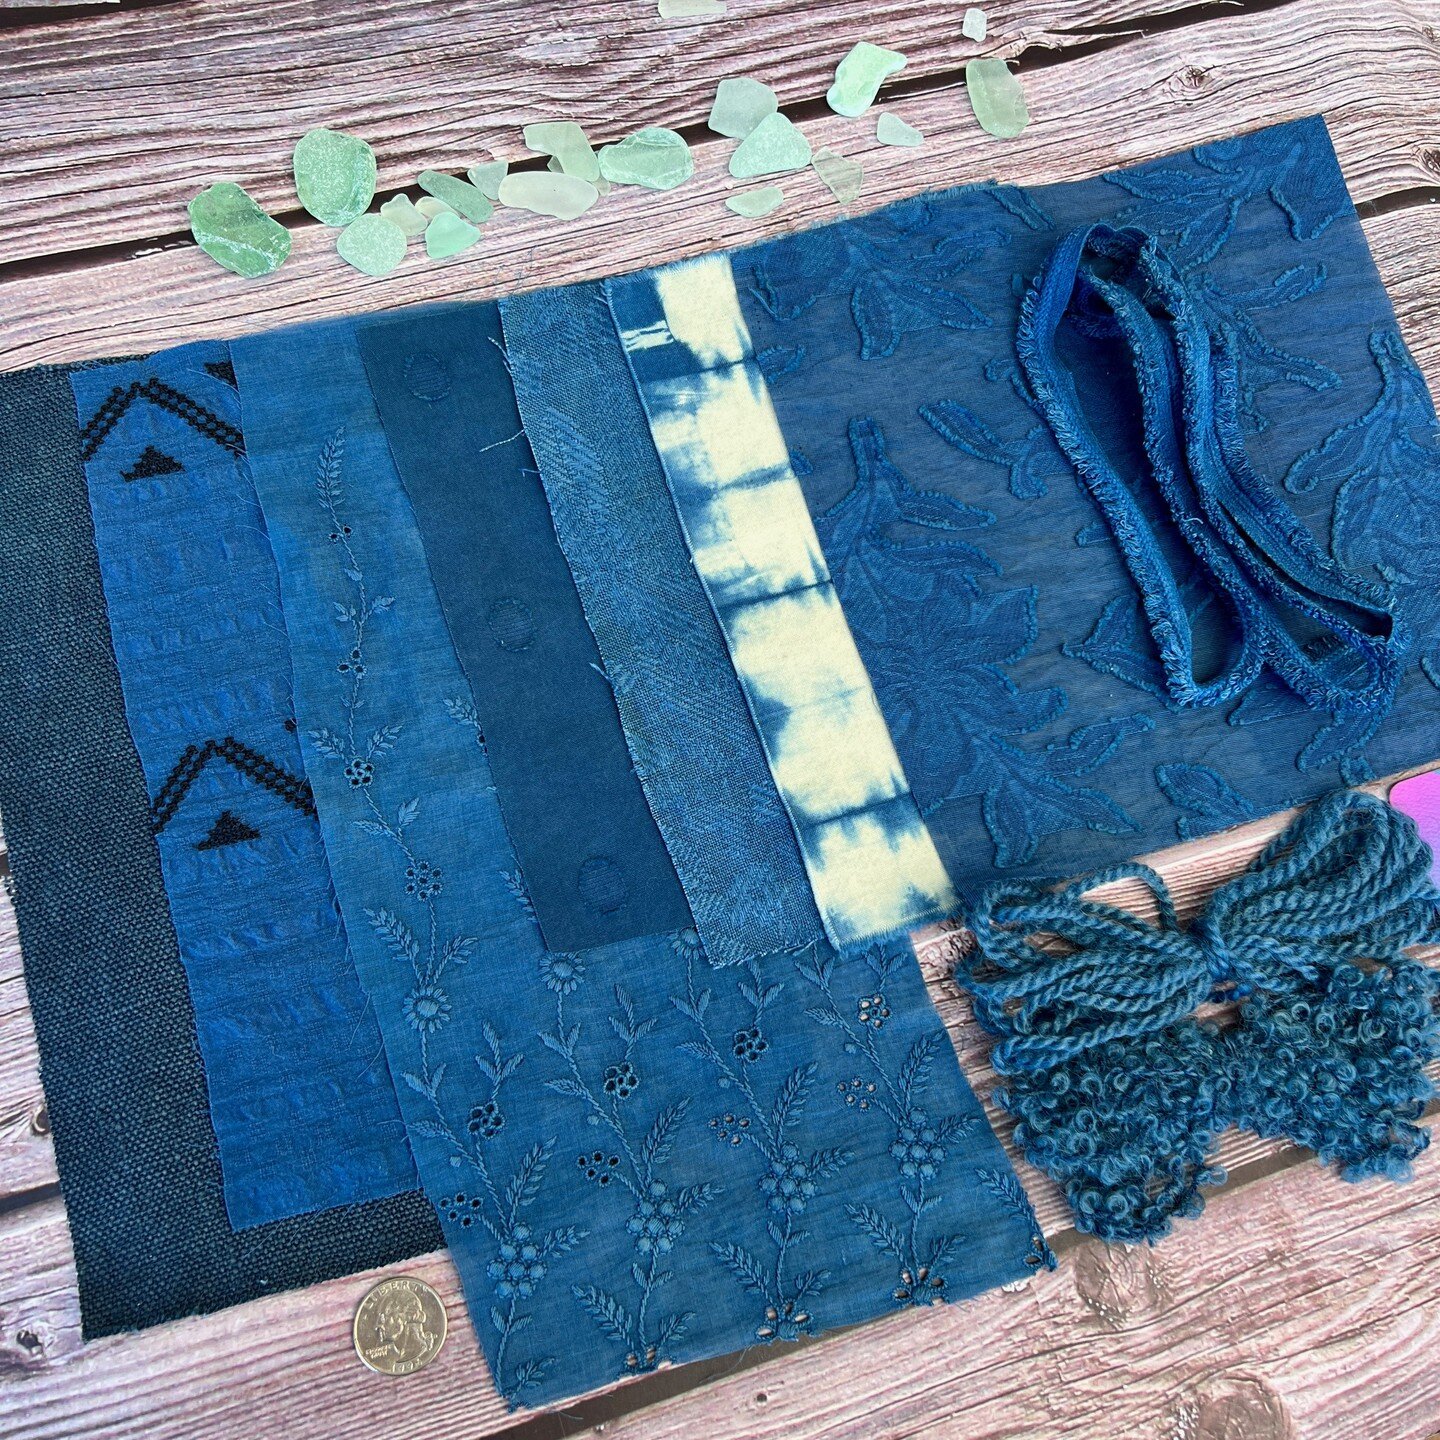 Ocean (no. 5) is a #plantdyed linen and cotton fabric pack dyed with natural indigo from @botanicalcolors 

All of these fibers are from #reclaimedmaterials sourced from secondhand clothing, vintage textiles, and leftover upholstery fabrics. #prelove